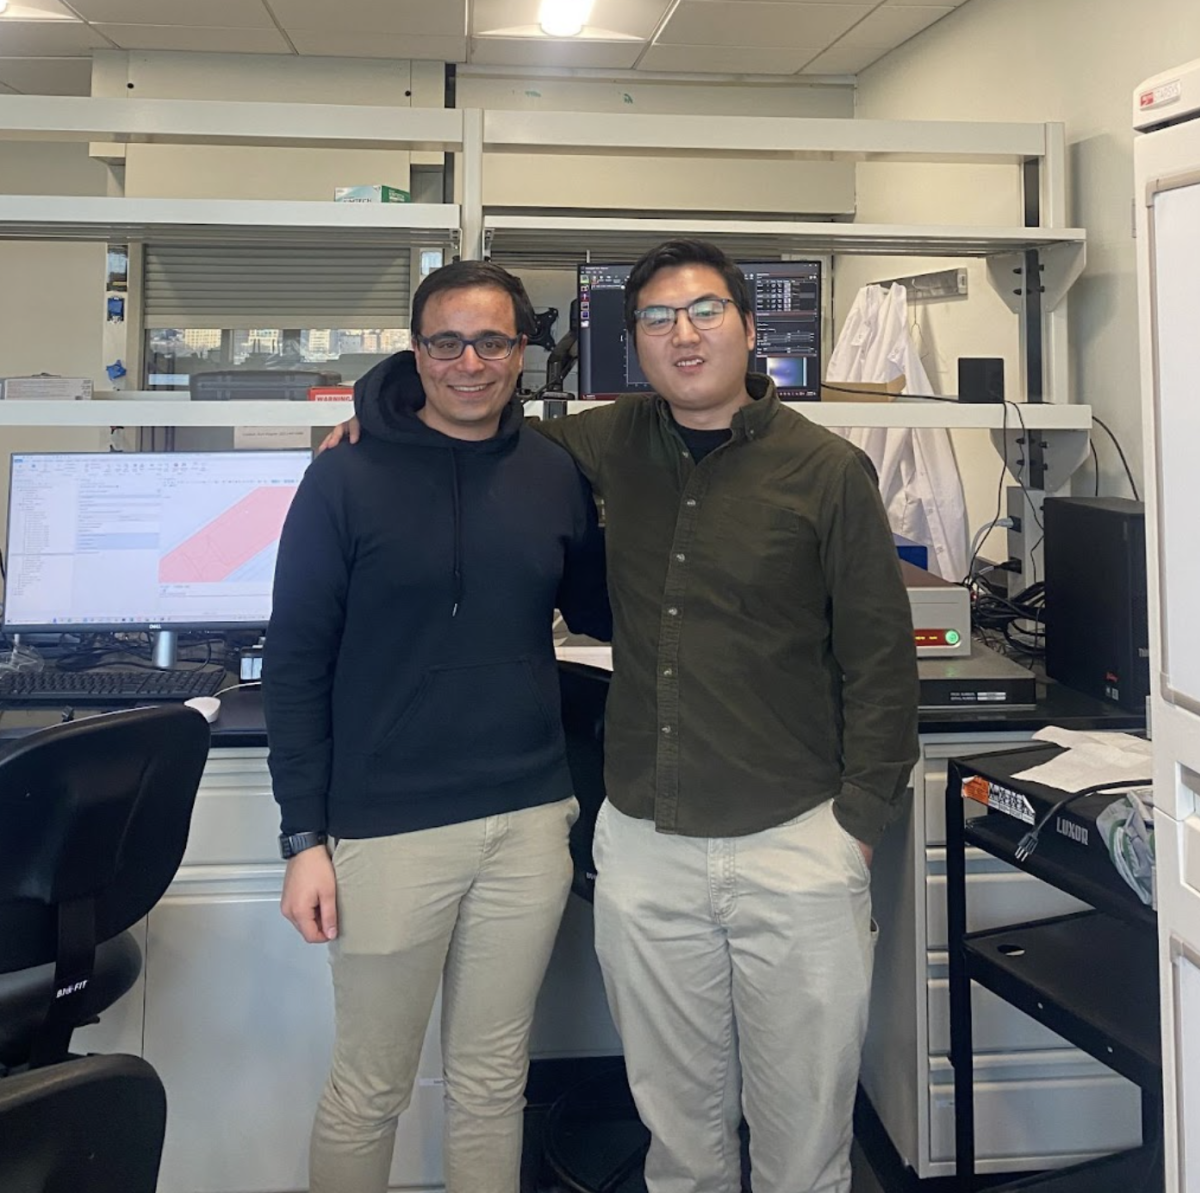 Students Xueshen Li and Xueshen Li stand next to each other in a laboratory - the Intelligent Imaging and Image Processing Lab